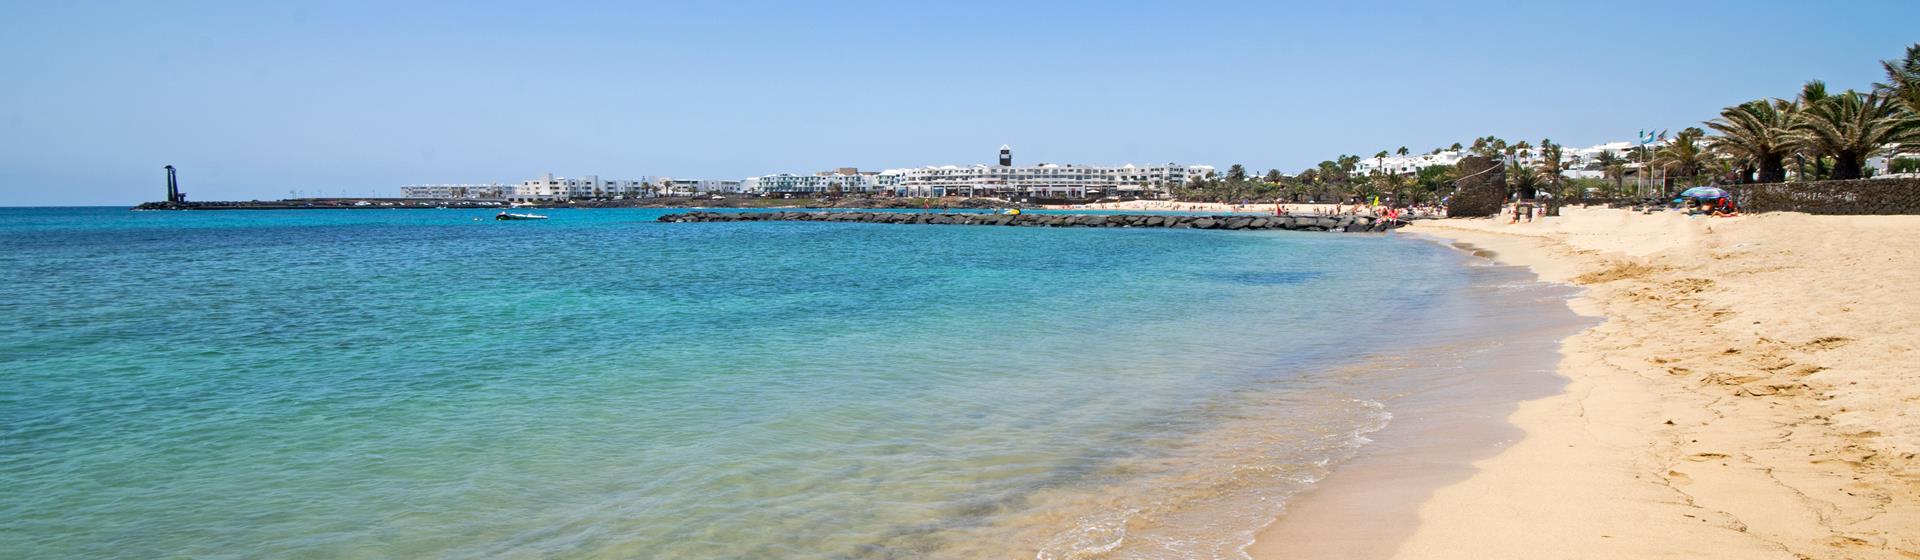 Holidays to Costa Teguise